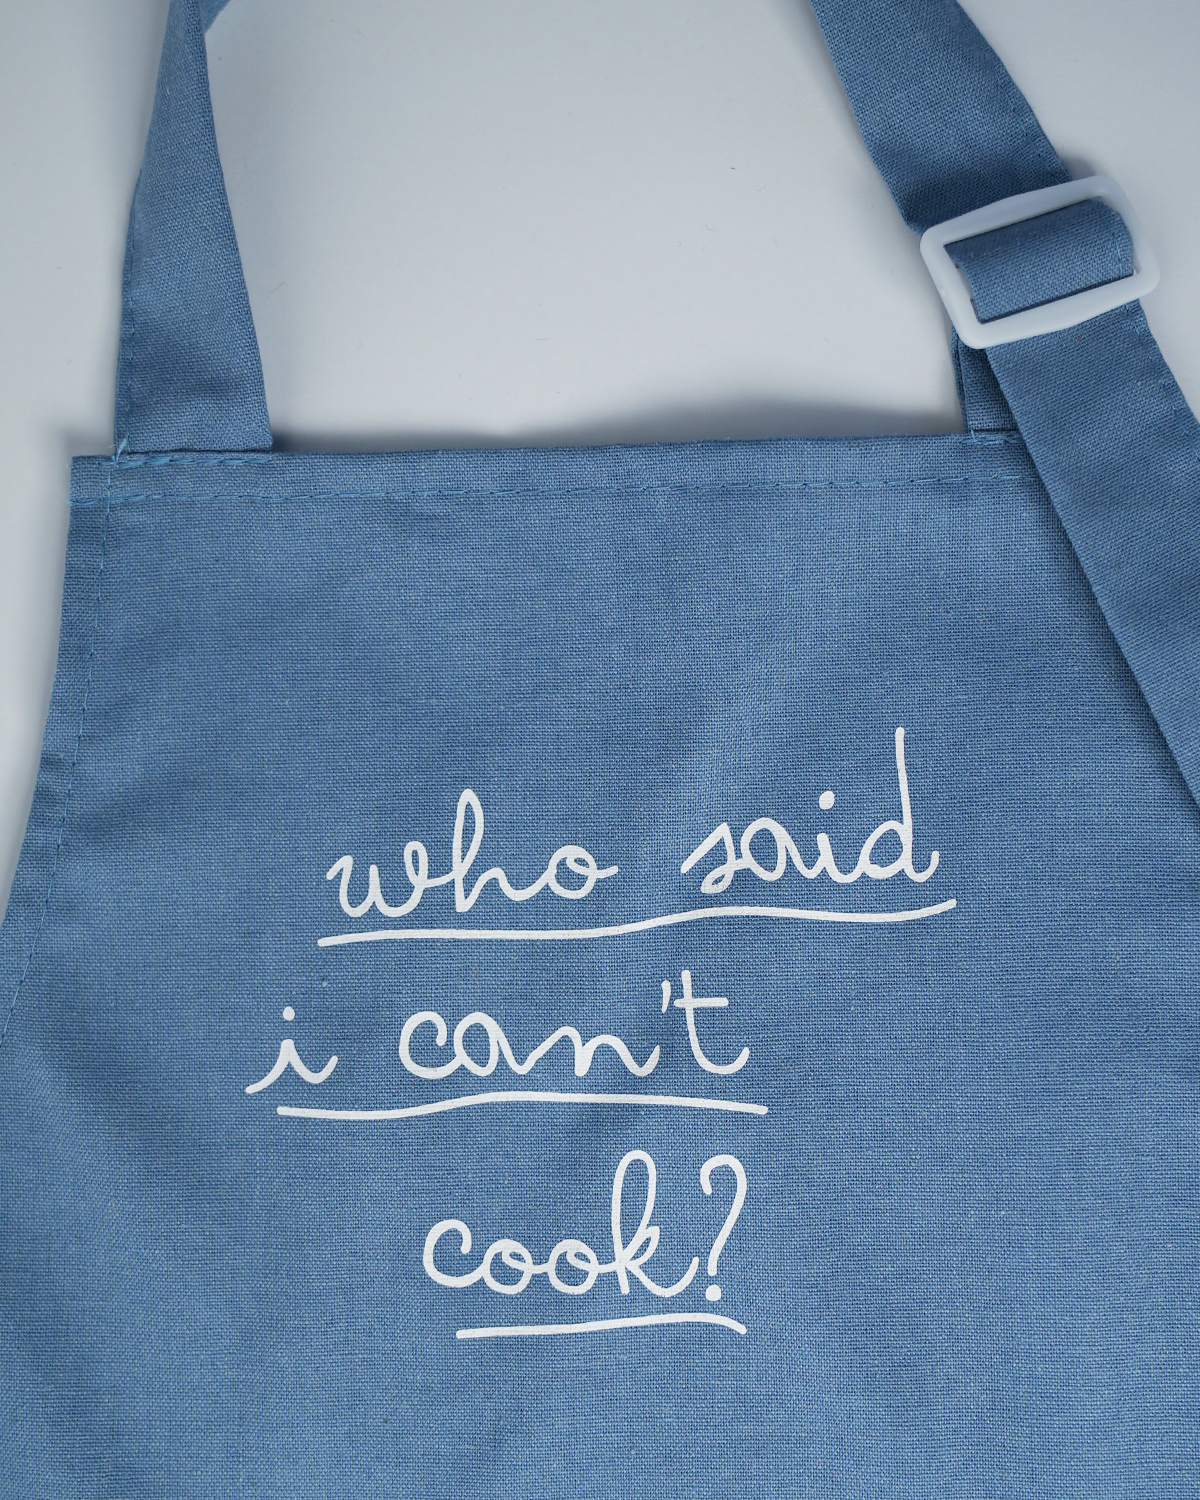 Little Chef Embroidered Linen ApronsGrab our Little Chef Embroidered Linen Aprons and look like a pro in the kitchen! With a white buckle, linen fabric, and a fun embroidered phrase on the front—"Who sPOP party suppliesChef Embroidered Linen cooking apron